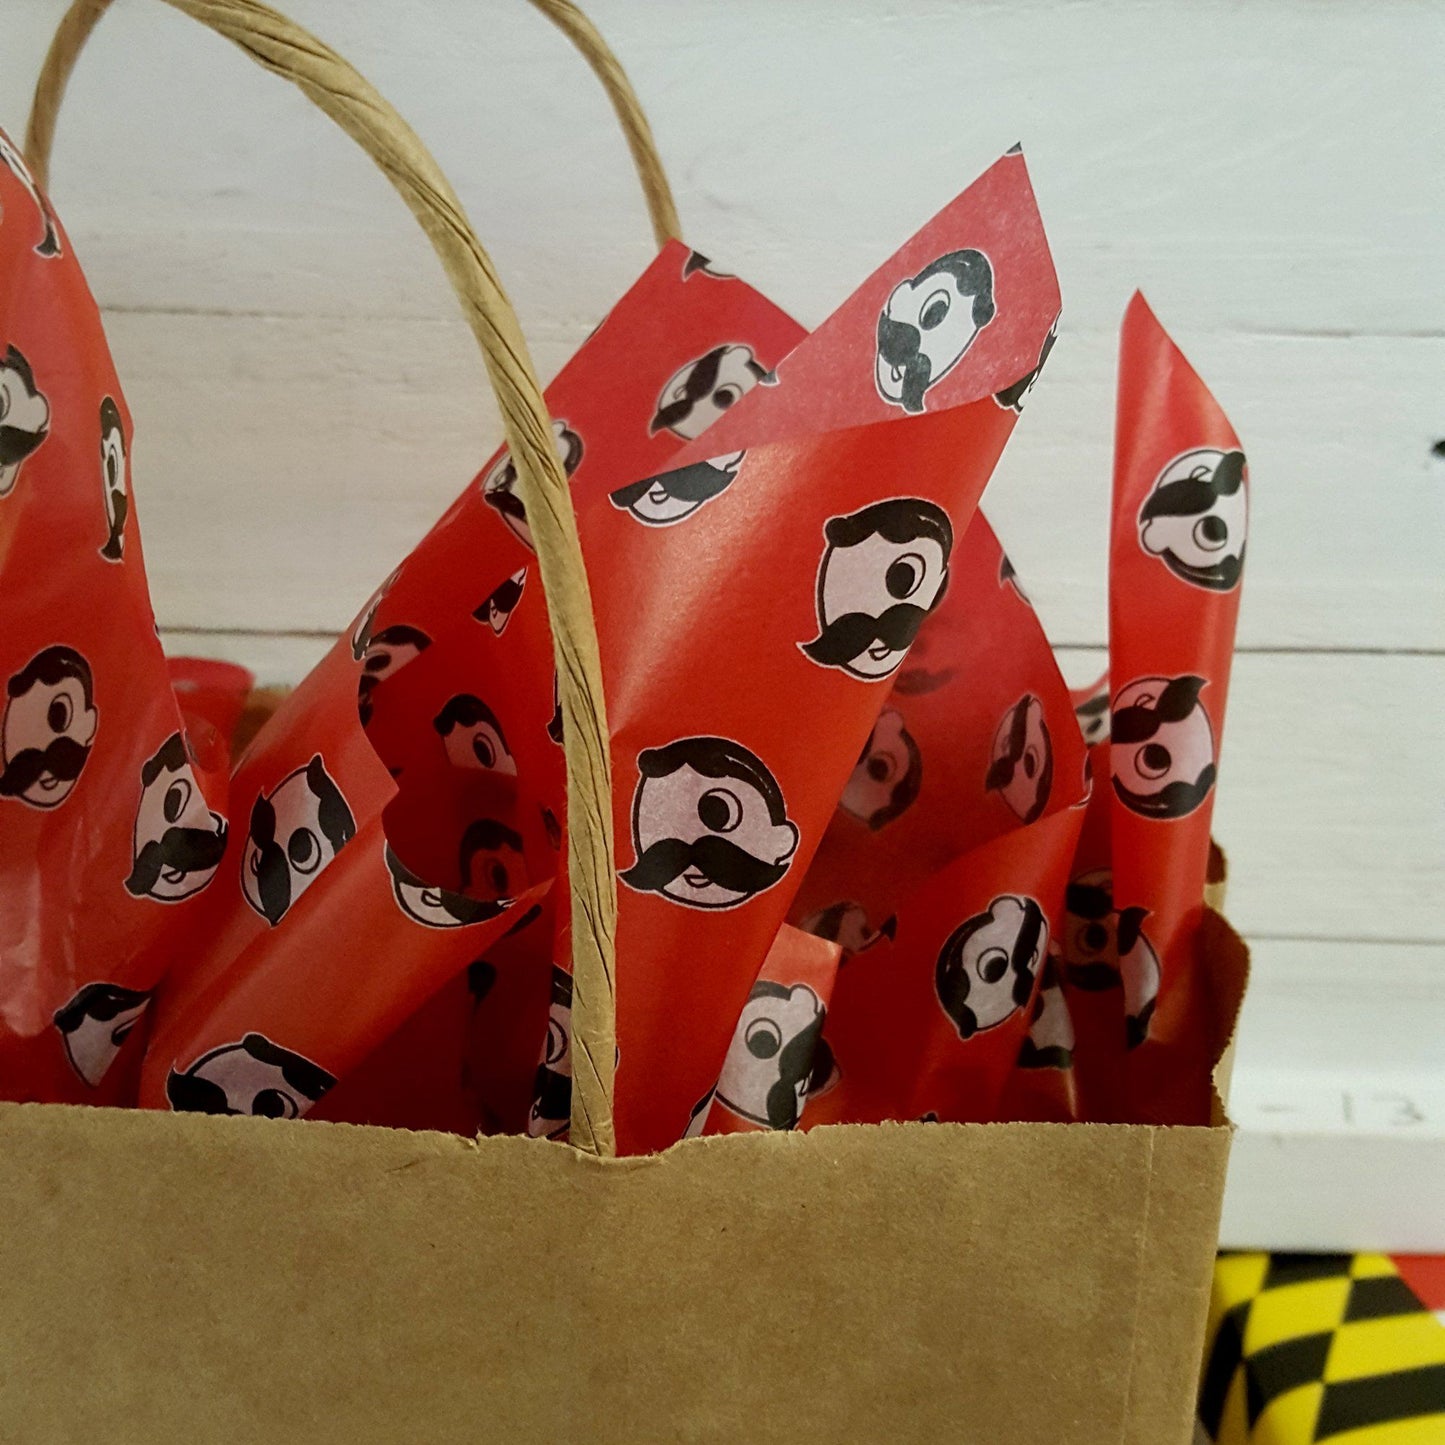 Natty Boh (Red) / Tissue Paper Pack - Route One Apparel